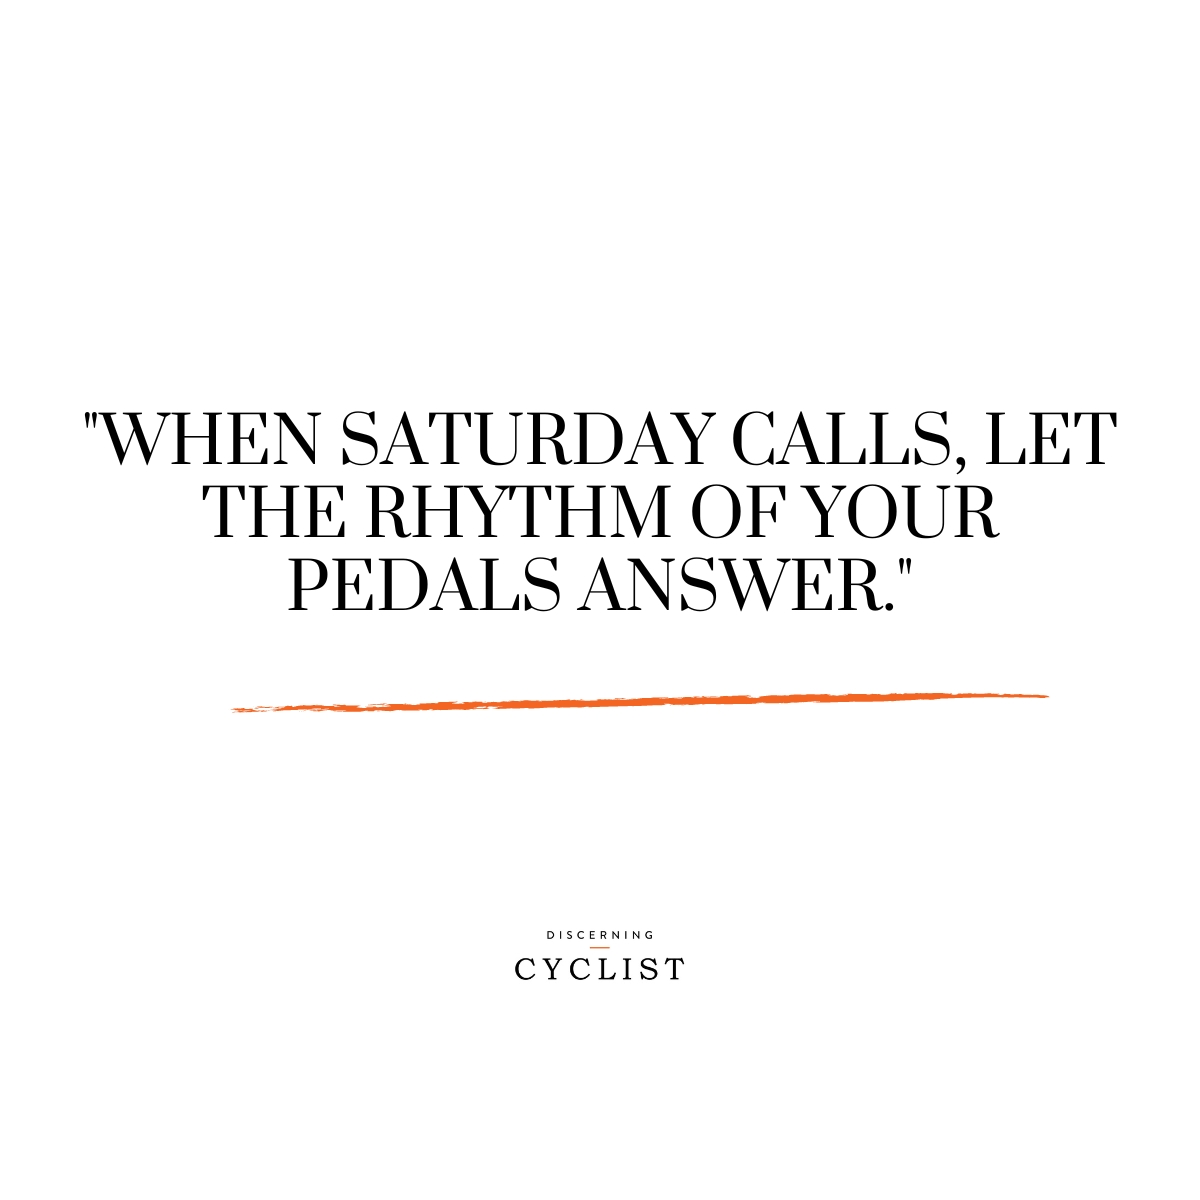 "When Saturday calls, let the rhythm of your pedals answer."